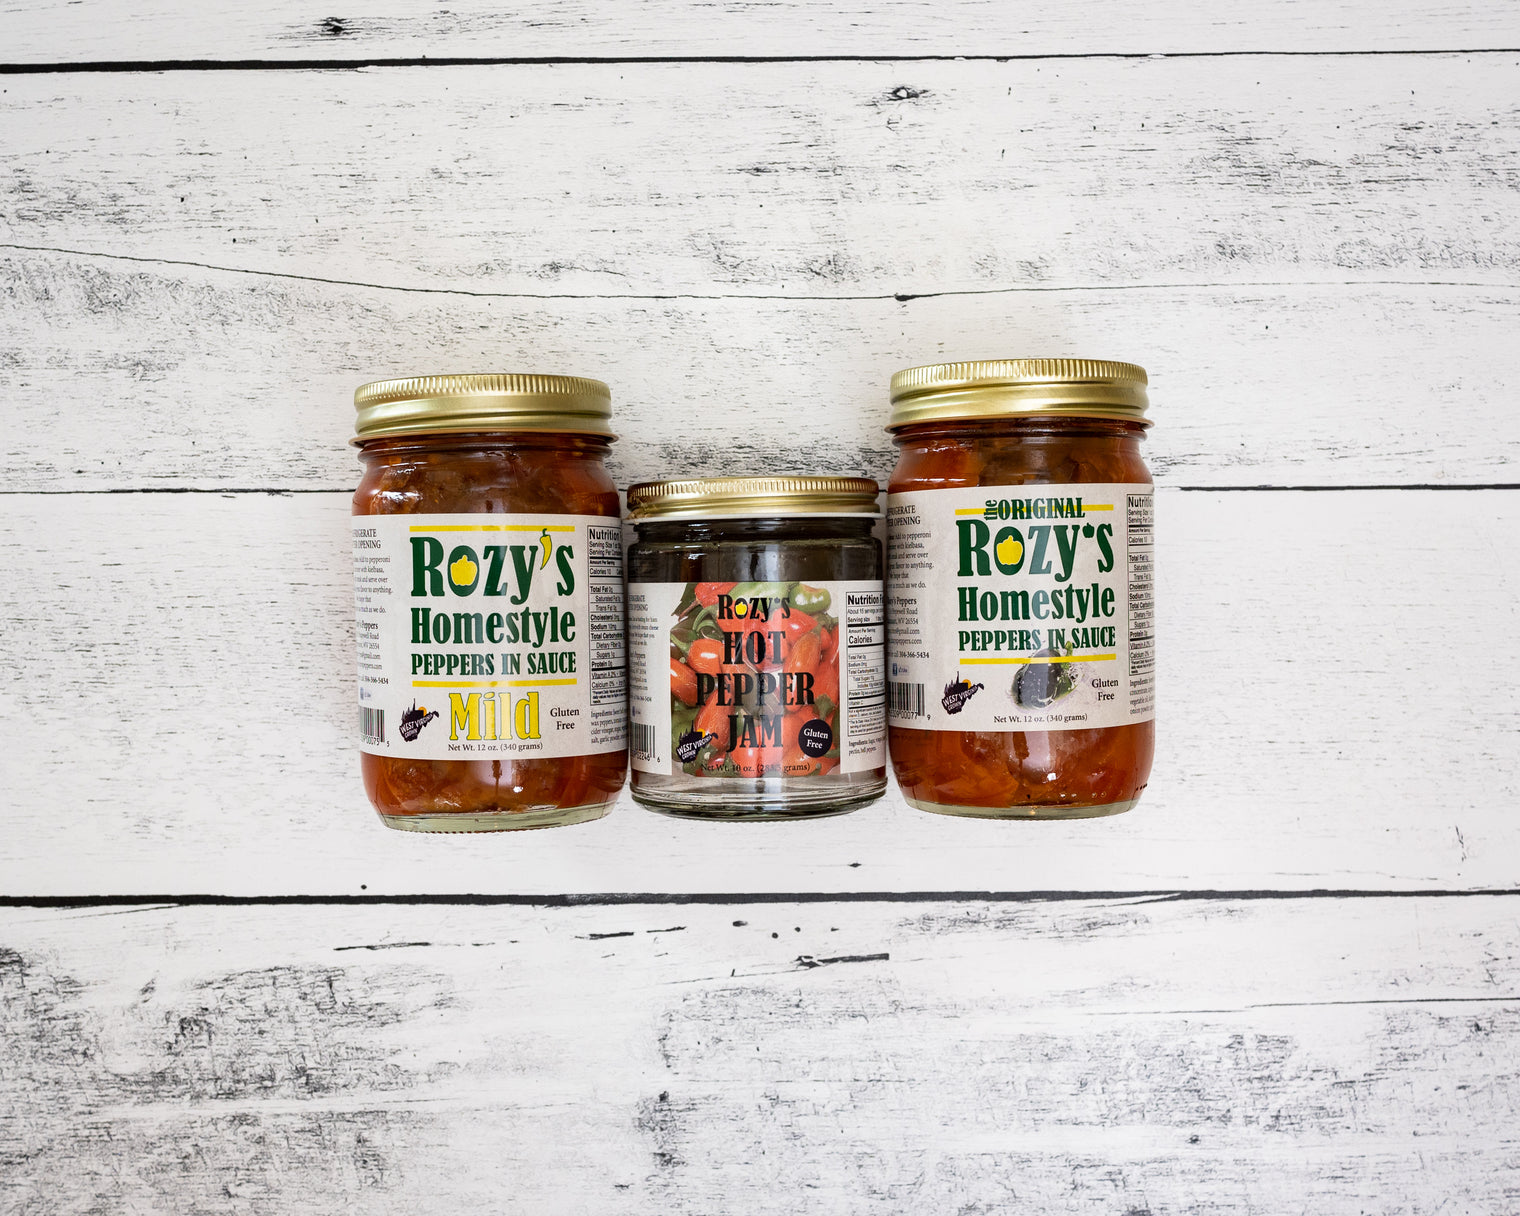 Rozy's Homestyle Peppers & Jam